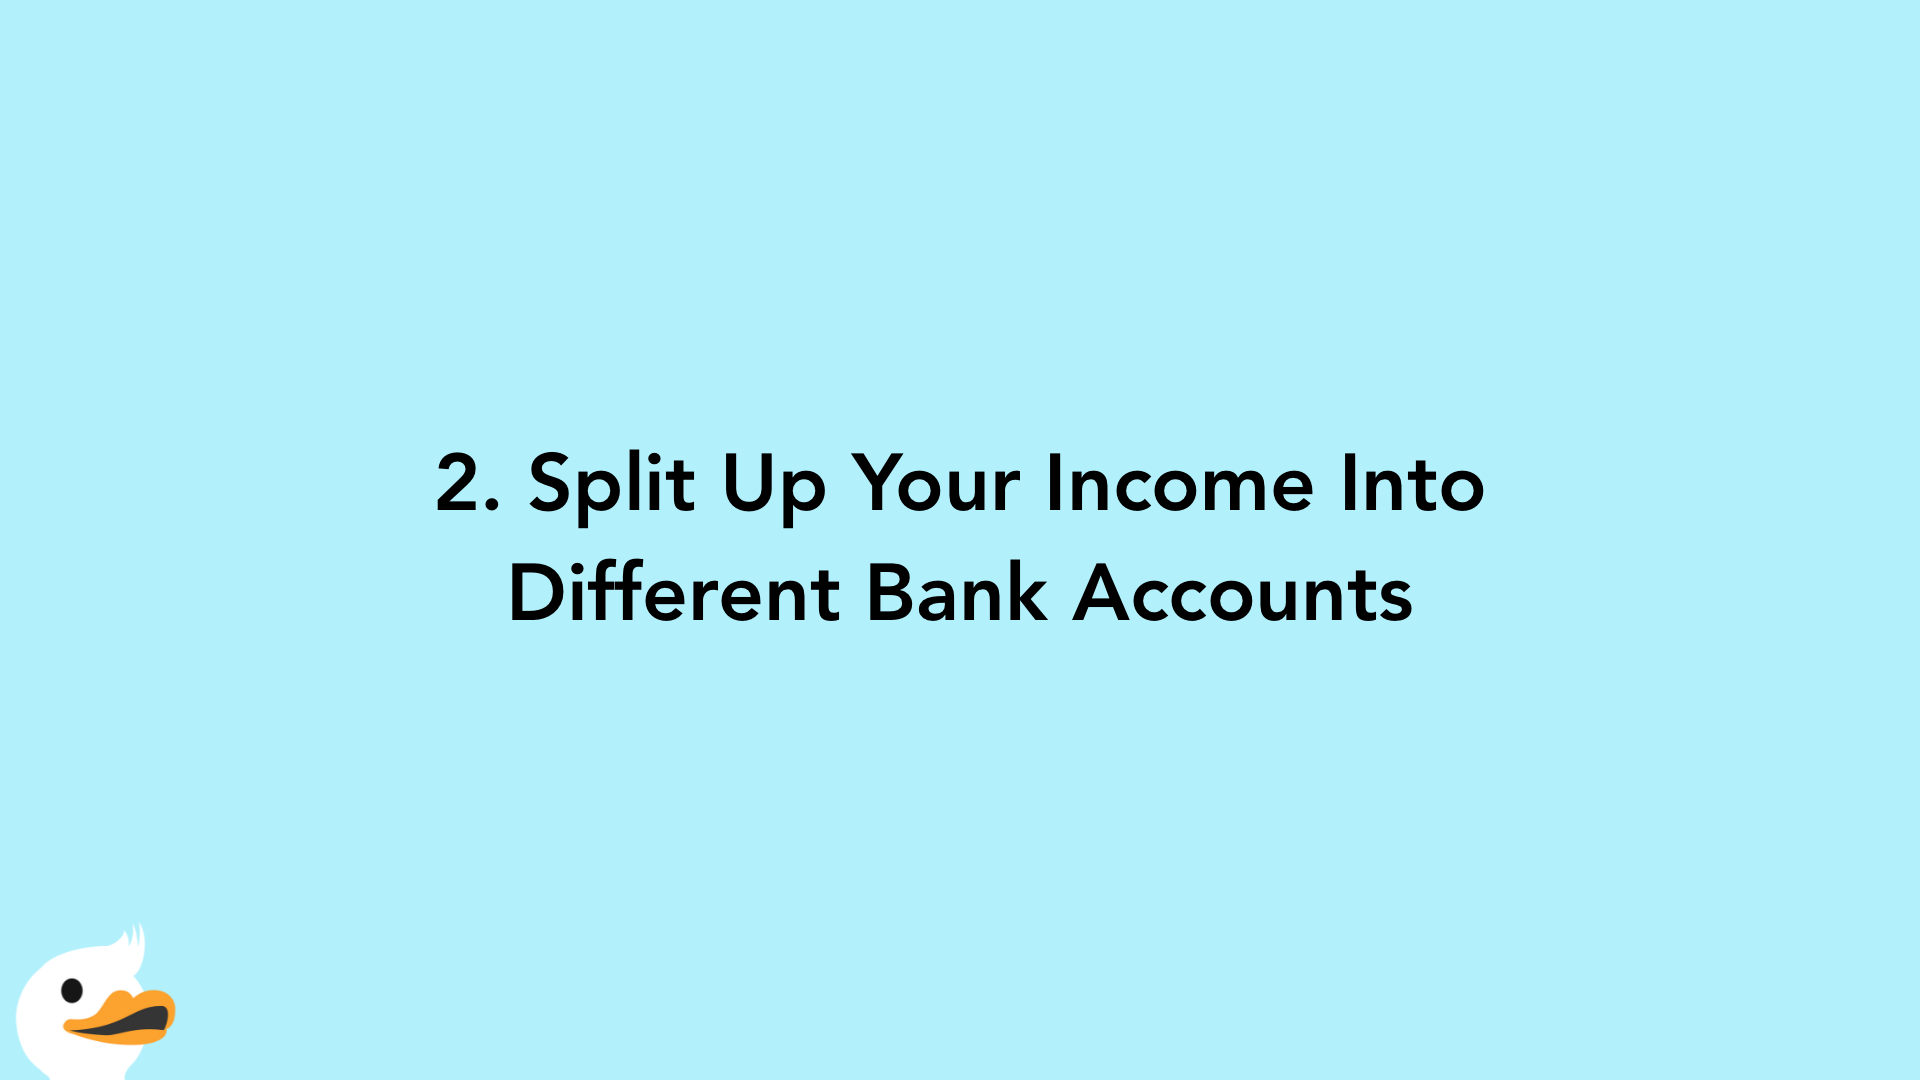 2. Split Up Your Income Into Different Bank Accounts